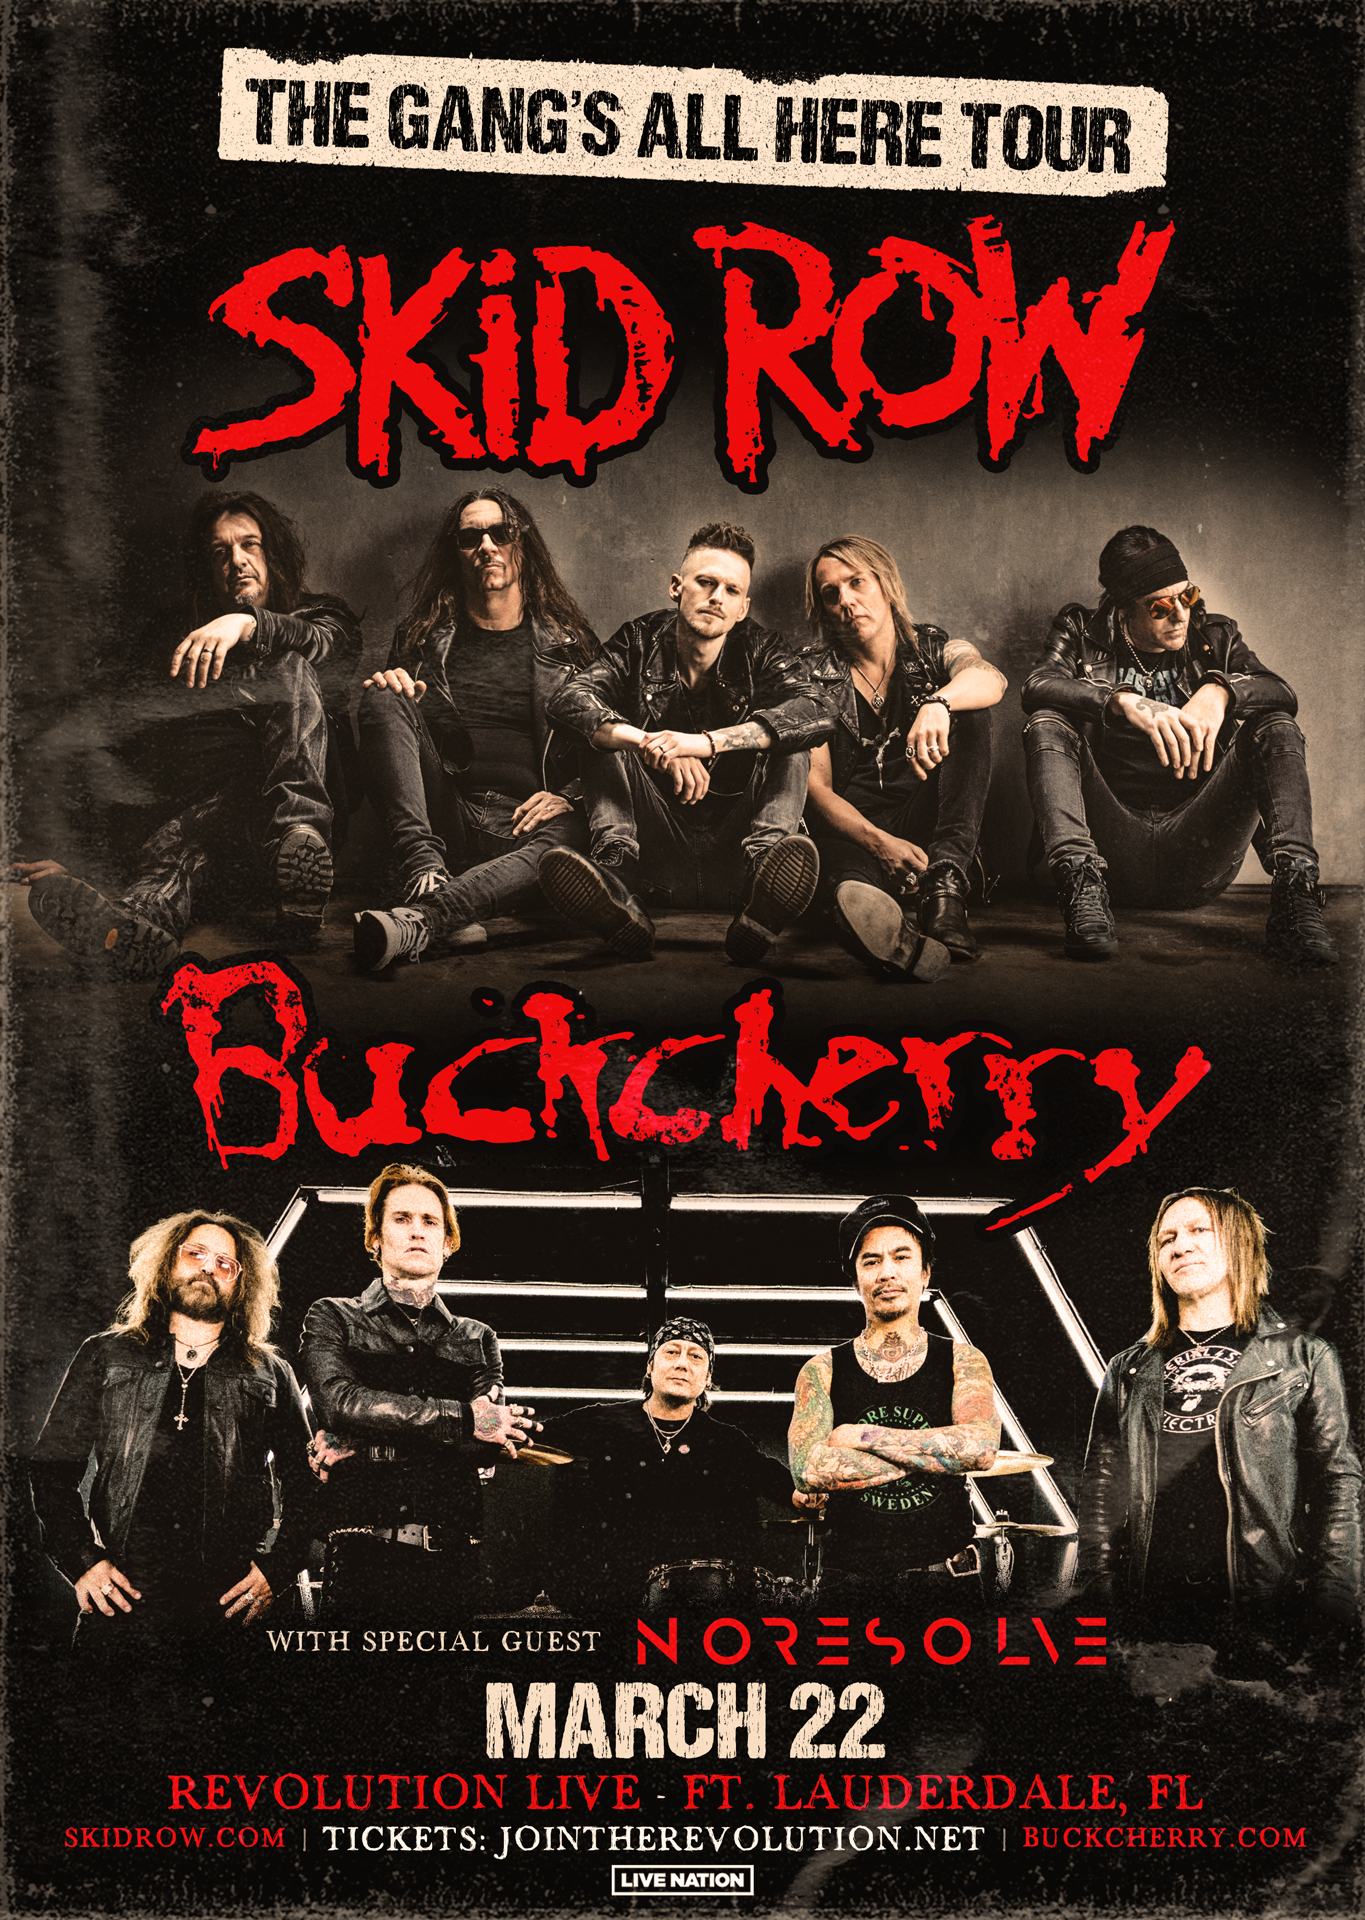 The Gang's All Here Tour with Skid Row and Buckcherry - Revolution